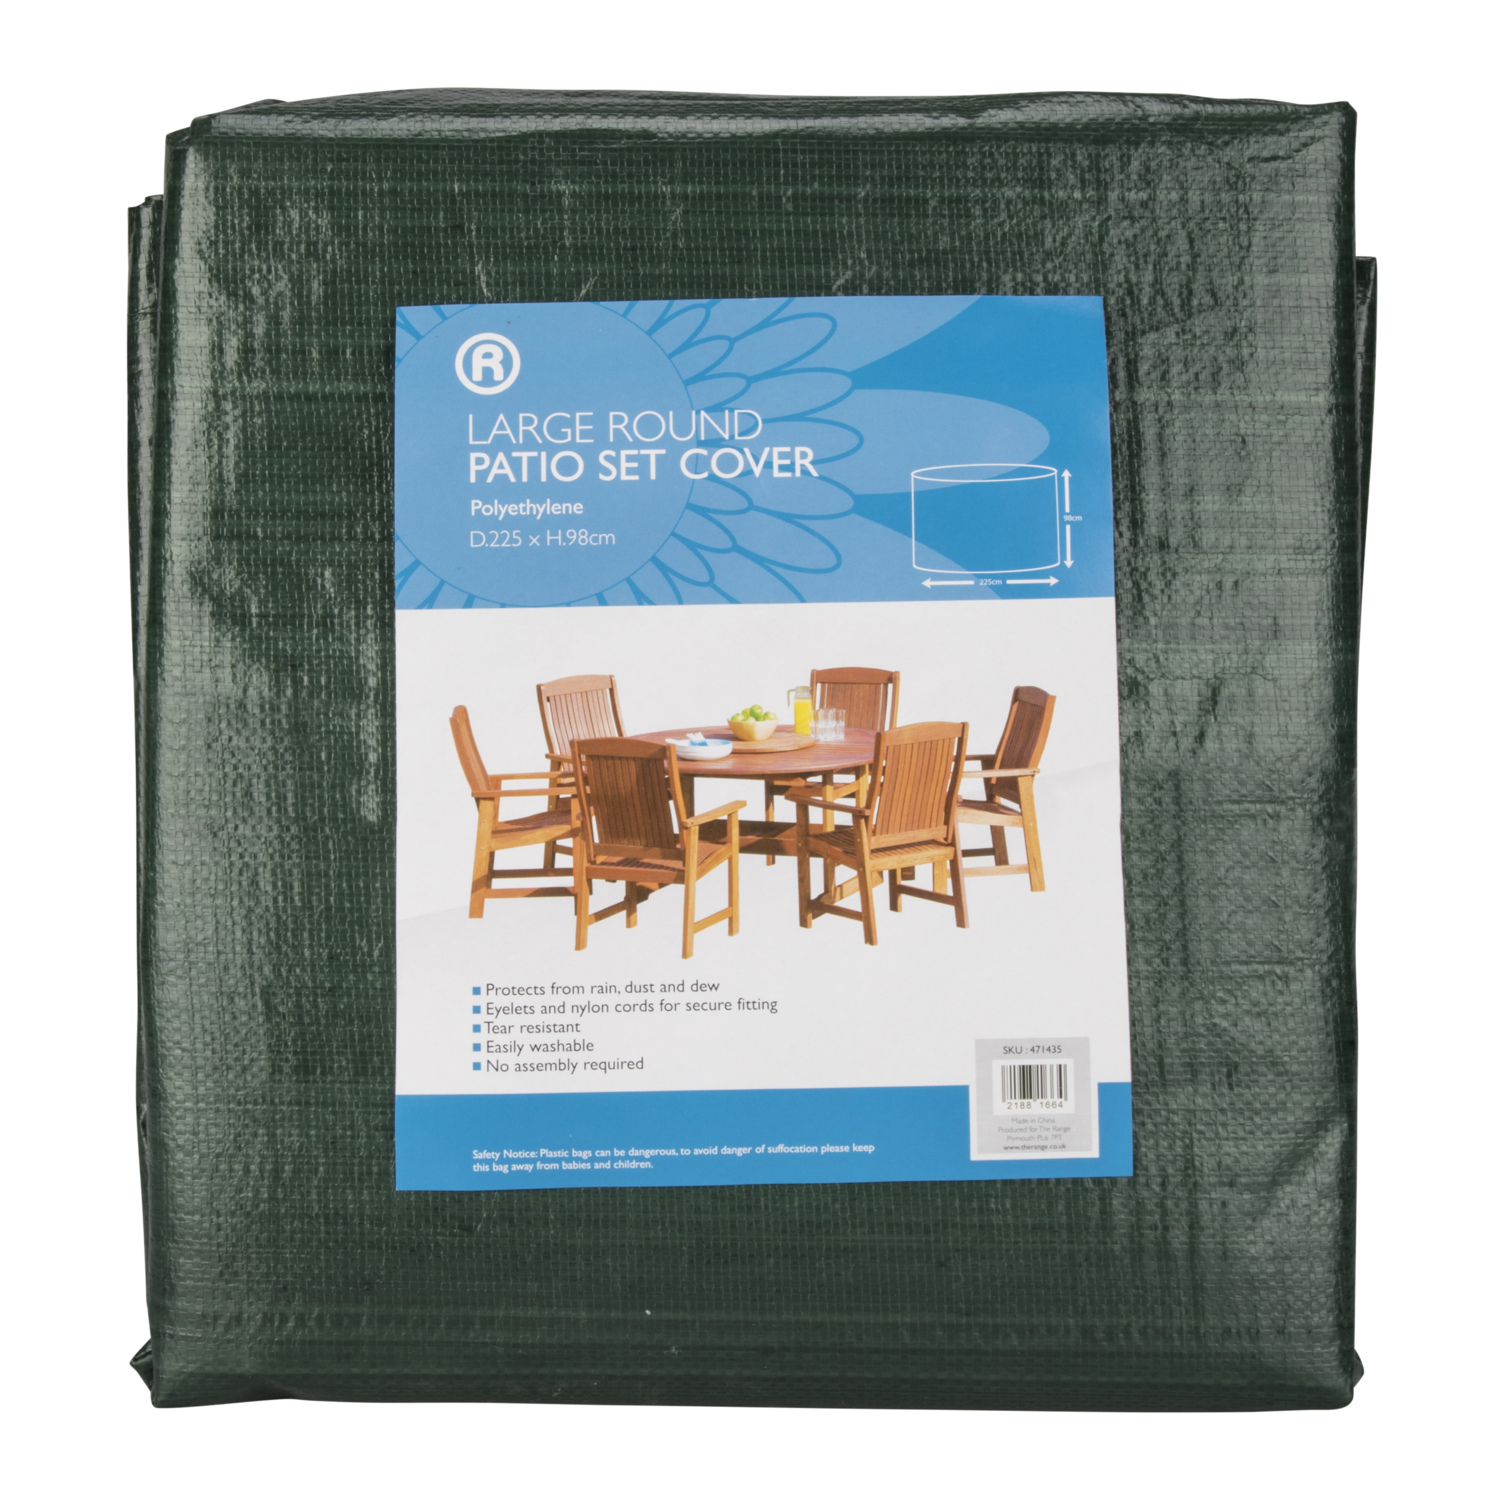 Green Large Round Patio Set Cover Image